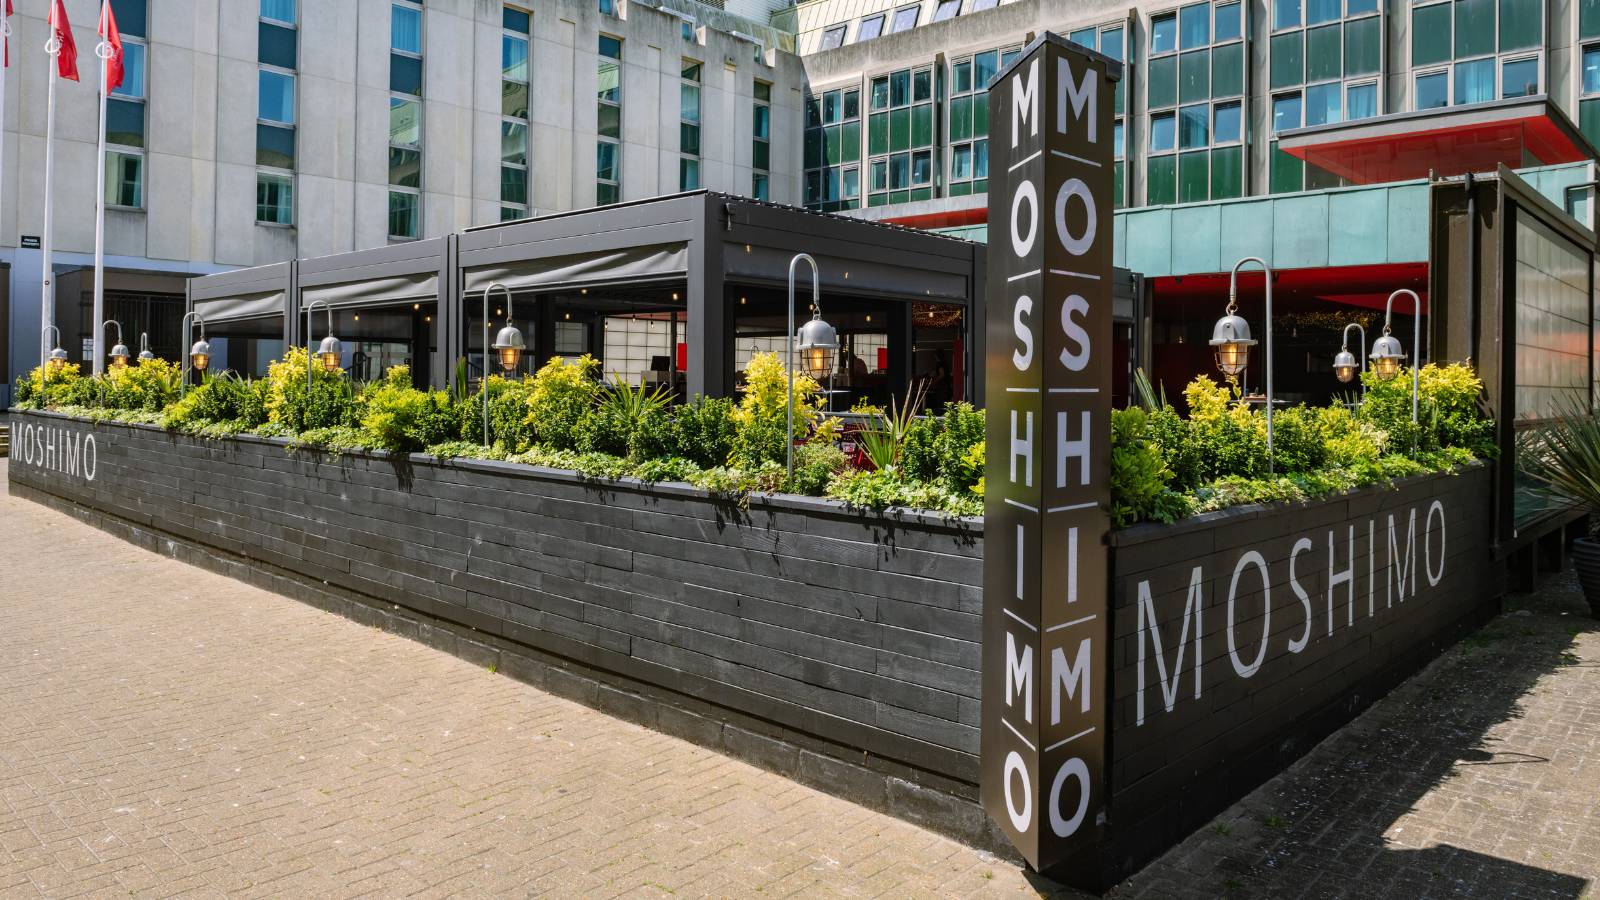 Restaurant seating and planters - Moshimo Brighton | NBS Source